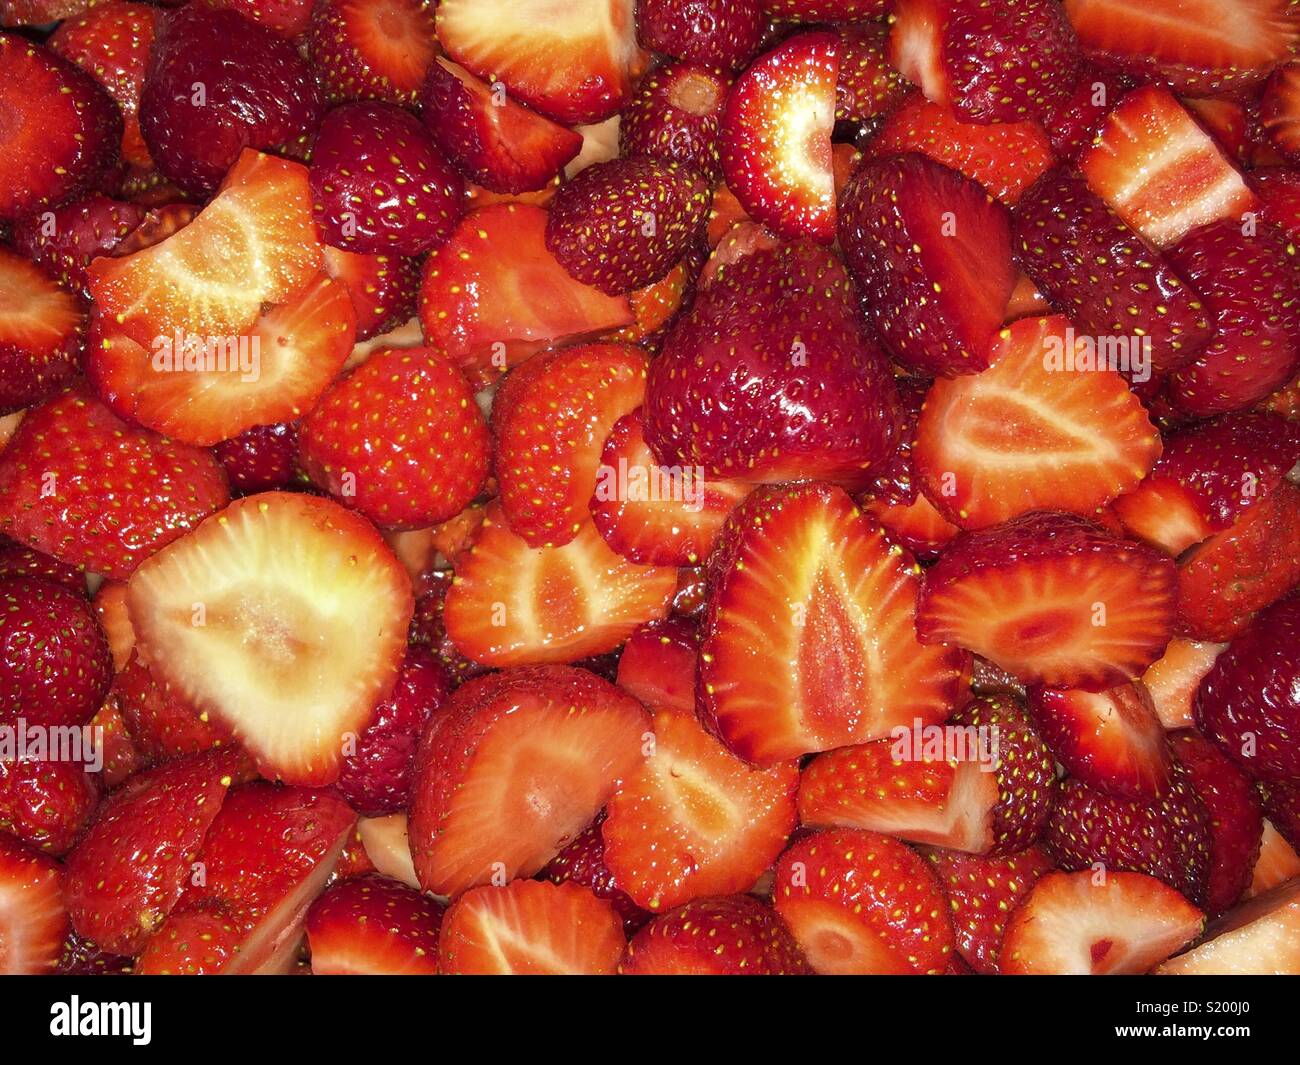 Detail closeup background of red fresh strawberrys prepered to cook marmalade Stock Photo